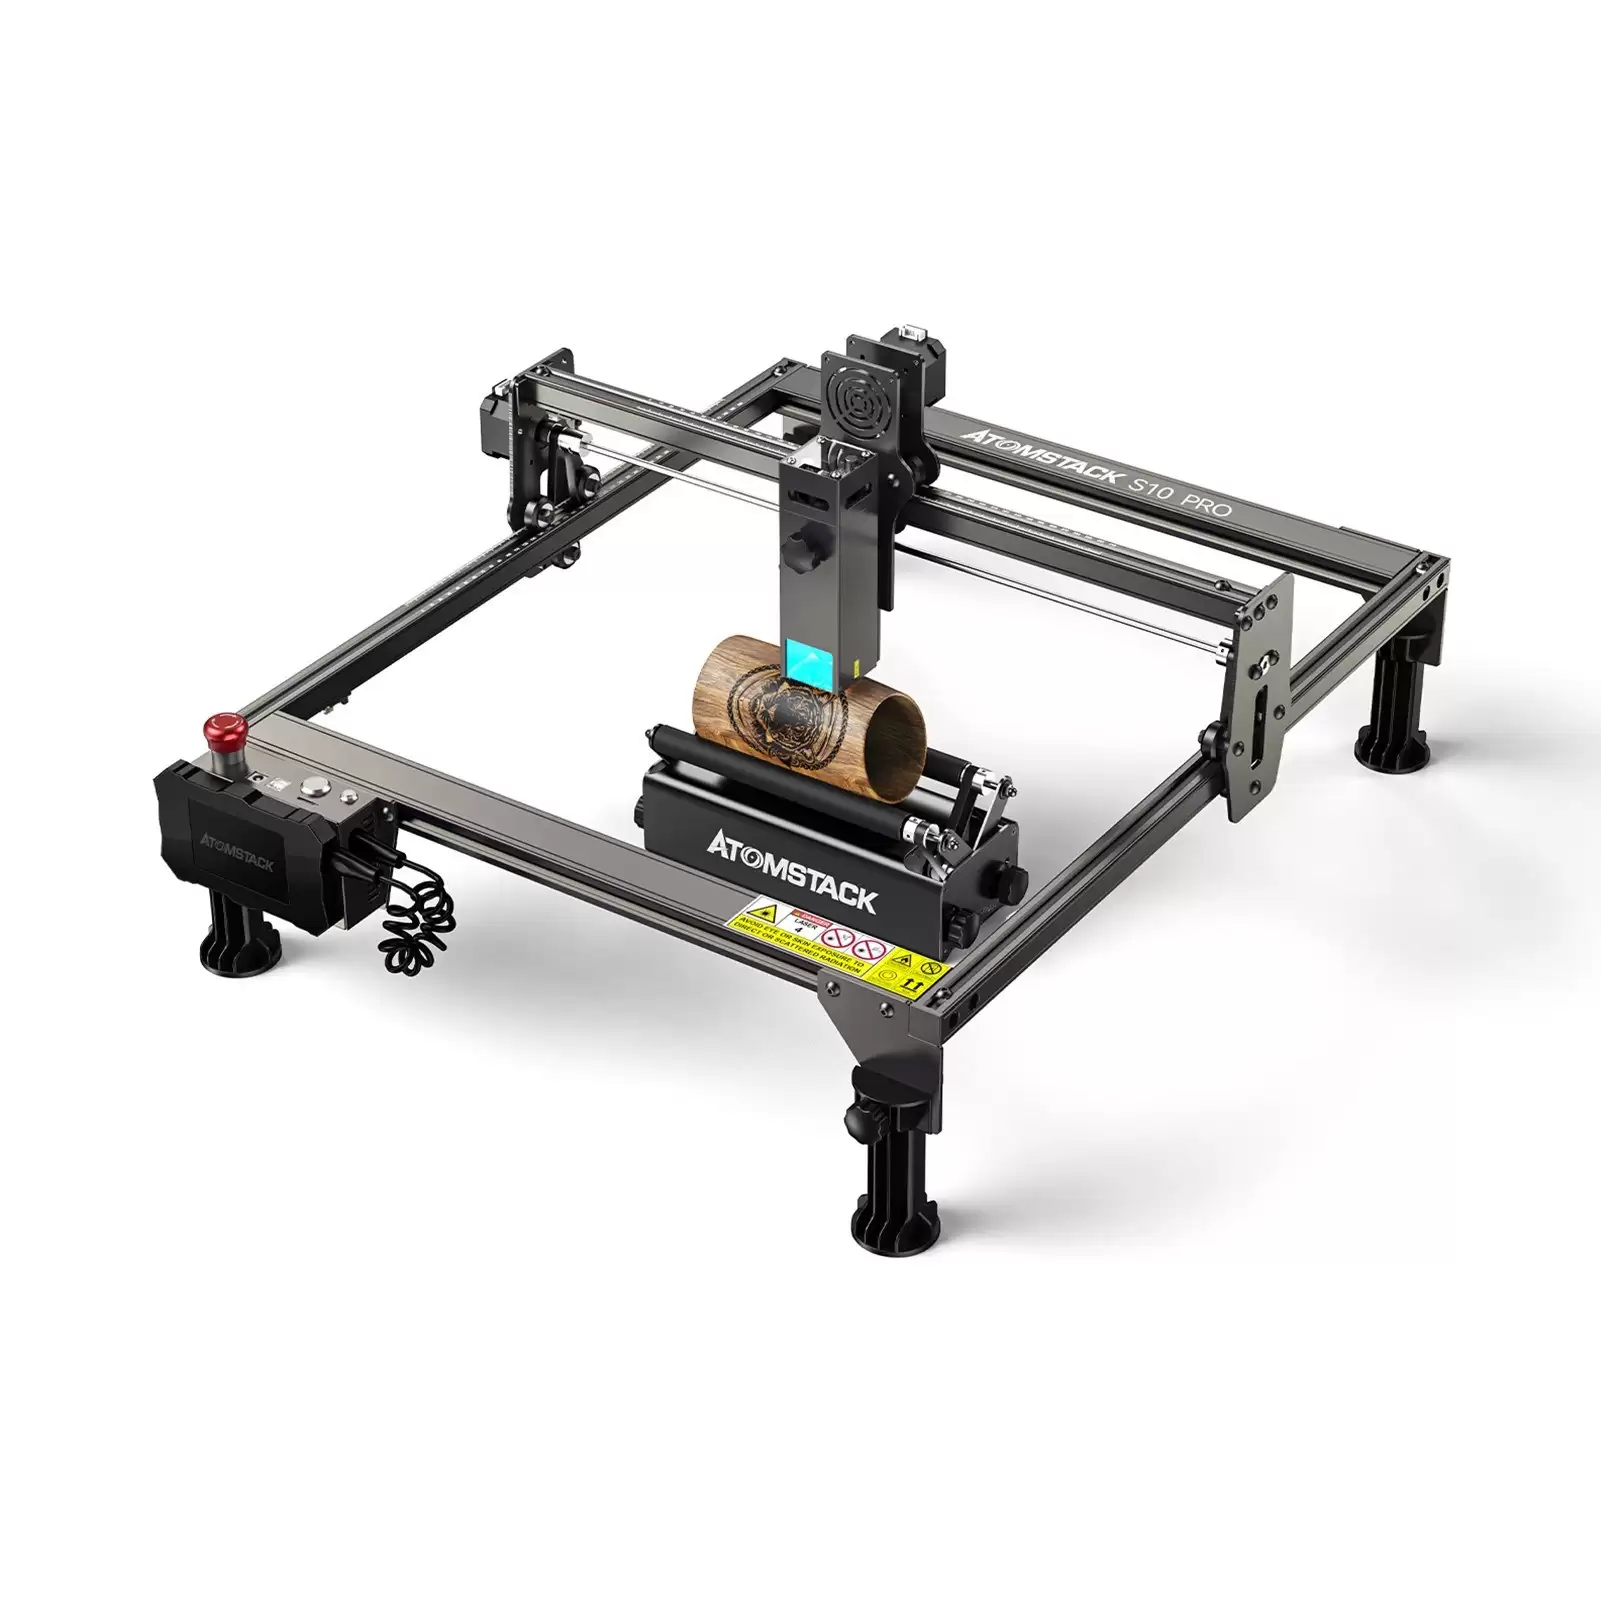 Order In Just $474 Atomstack S10 Pro 10w Cnc Desktop Diy Laser Engraving Cutting Machine Using This Tomtop Discount Code